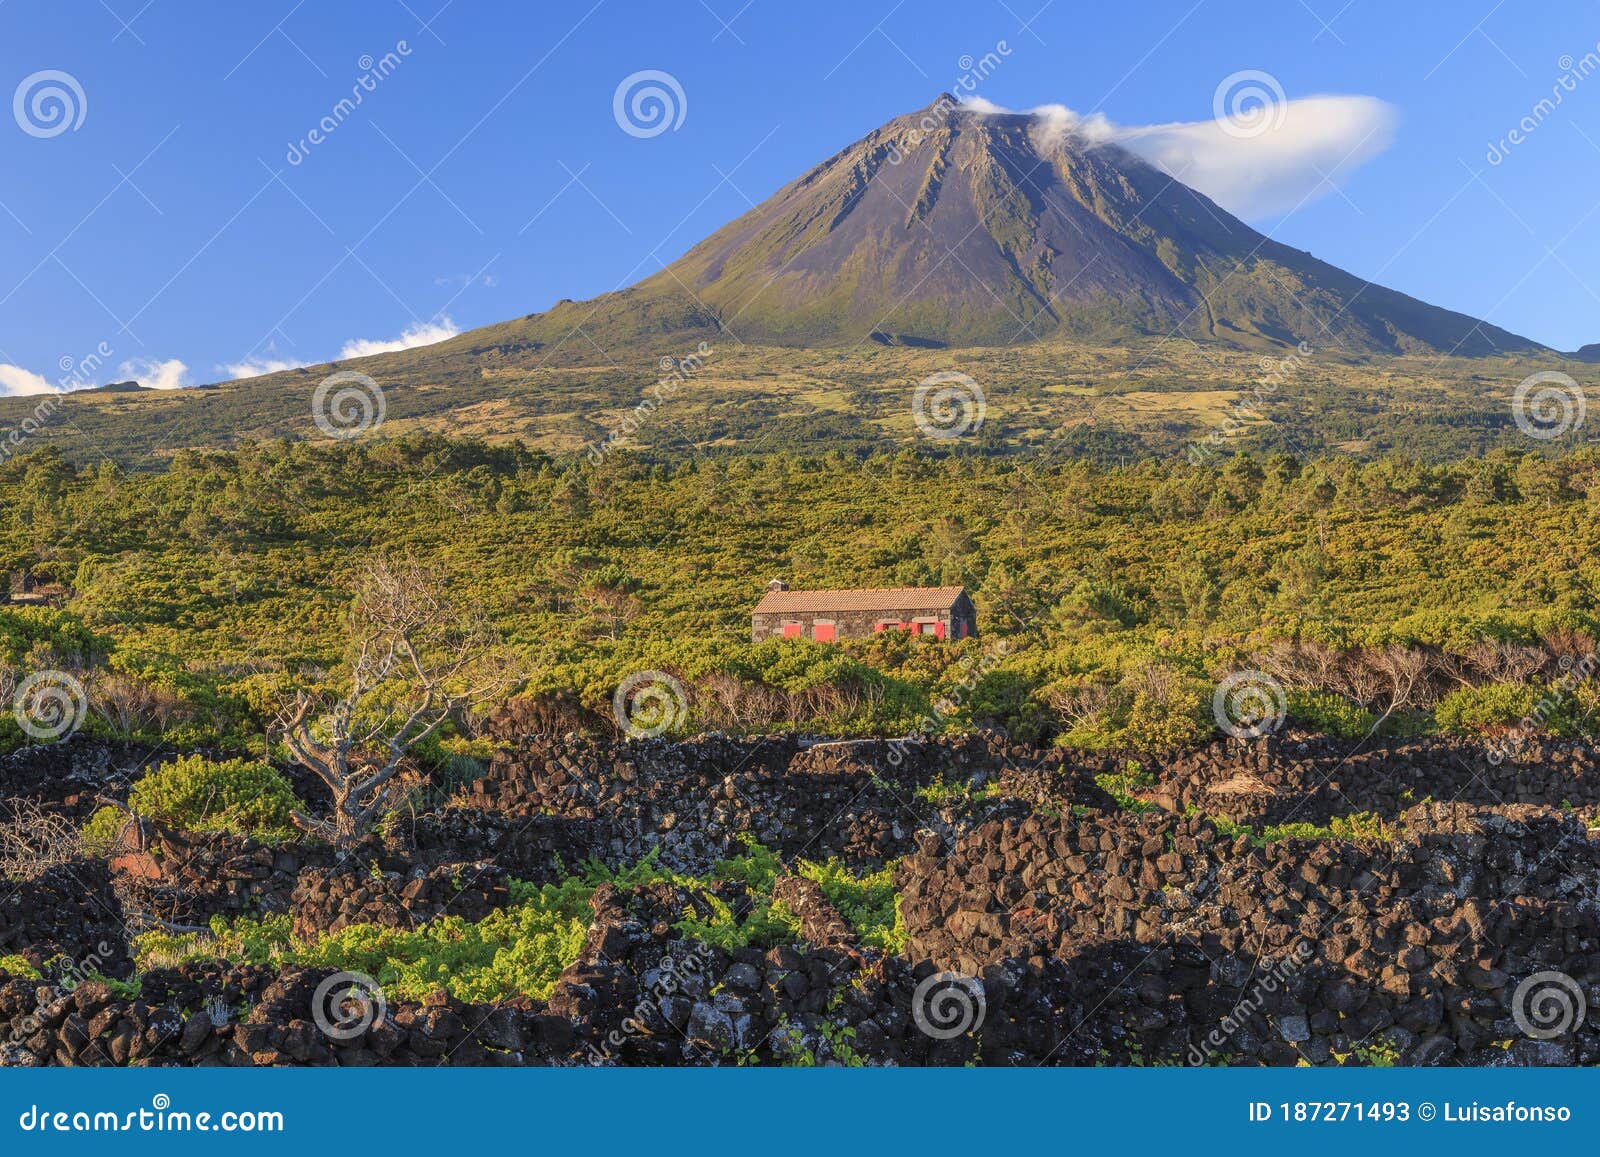 pico island, azores. vineyards and mountain